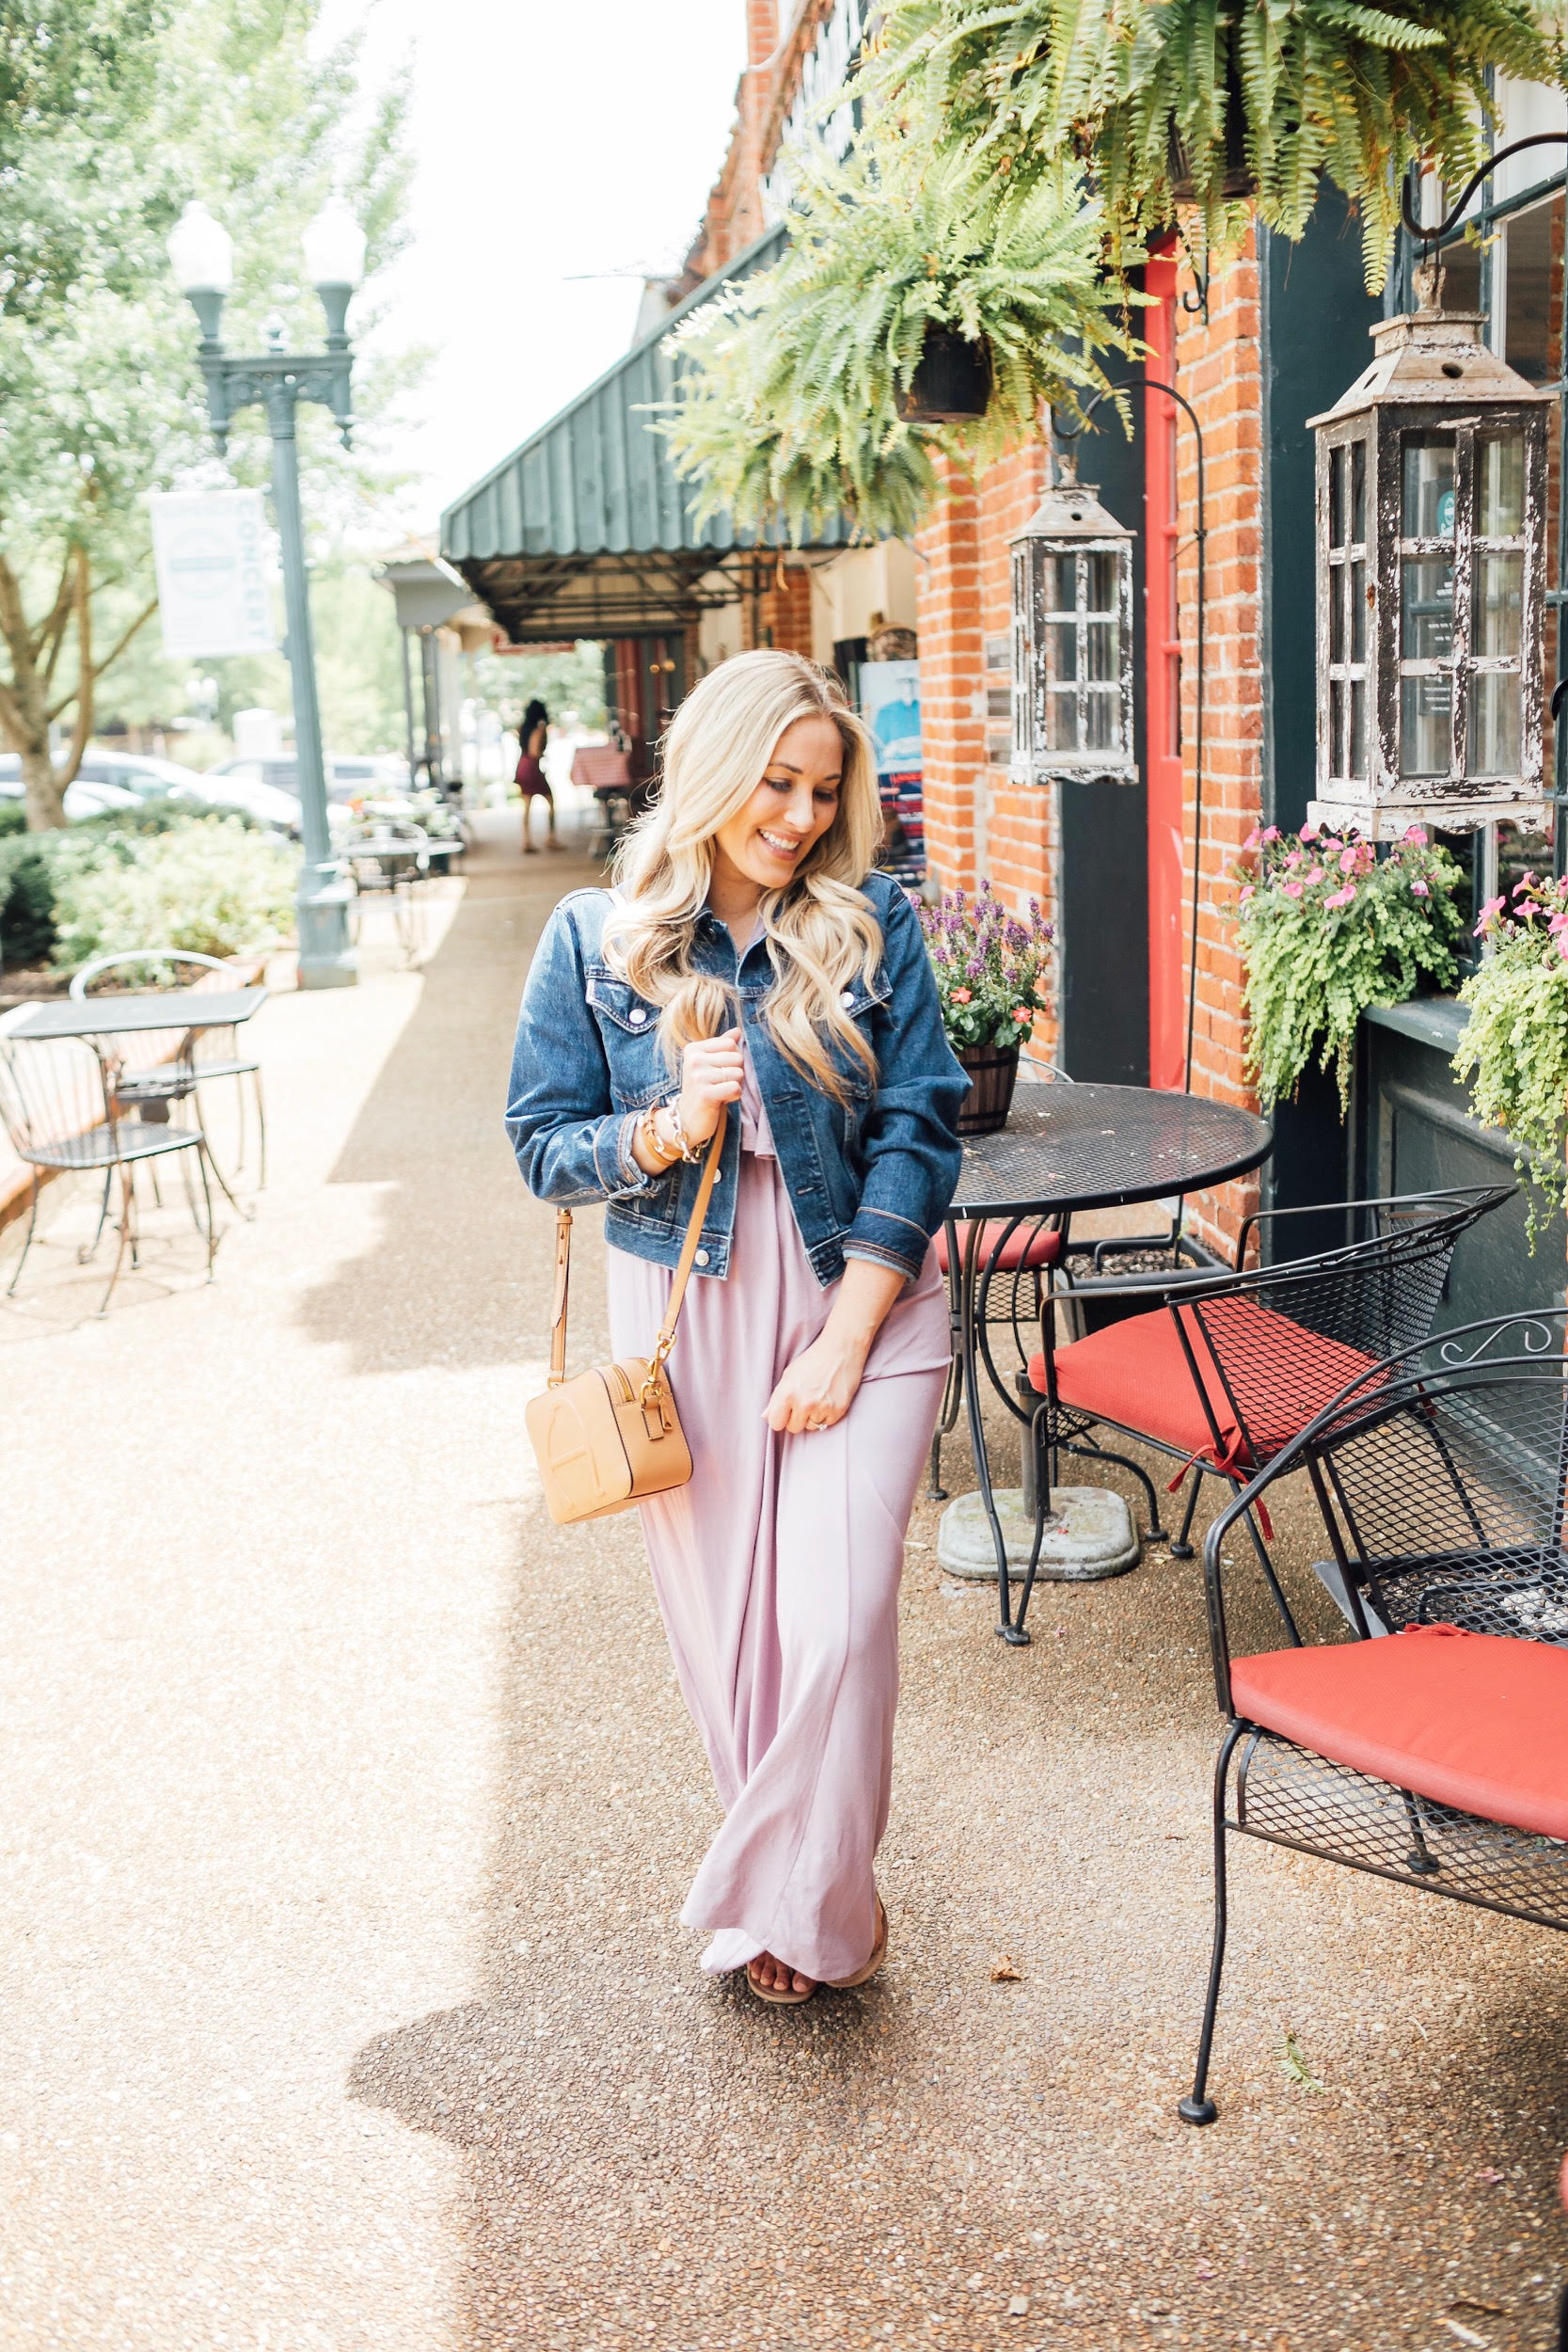 Cute maxi dresses to wear from Summer to Fall featured by top US fashion blog, Walking in Memphis in High Heels: image of a woman wearing a PinkBlush off the shoulder maxi dress, and Tory Burch Miller flip flops.